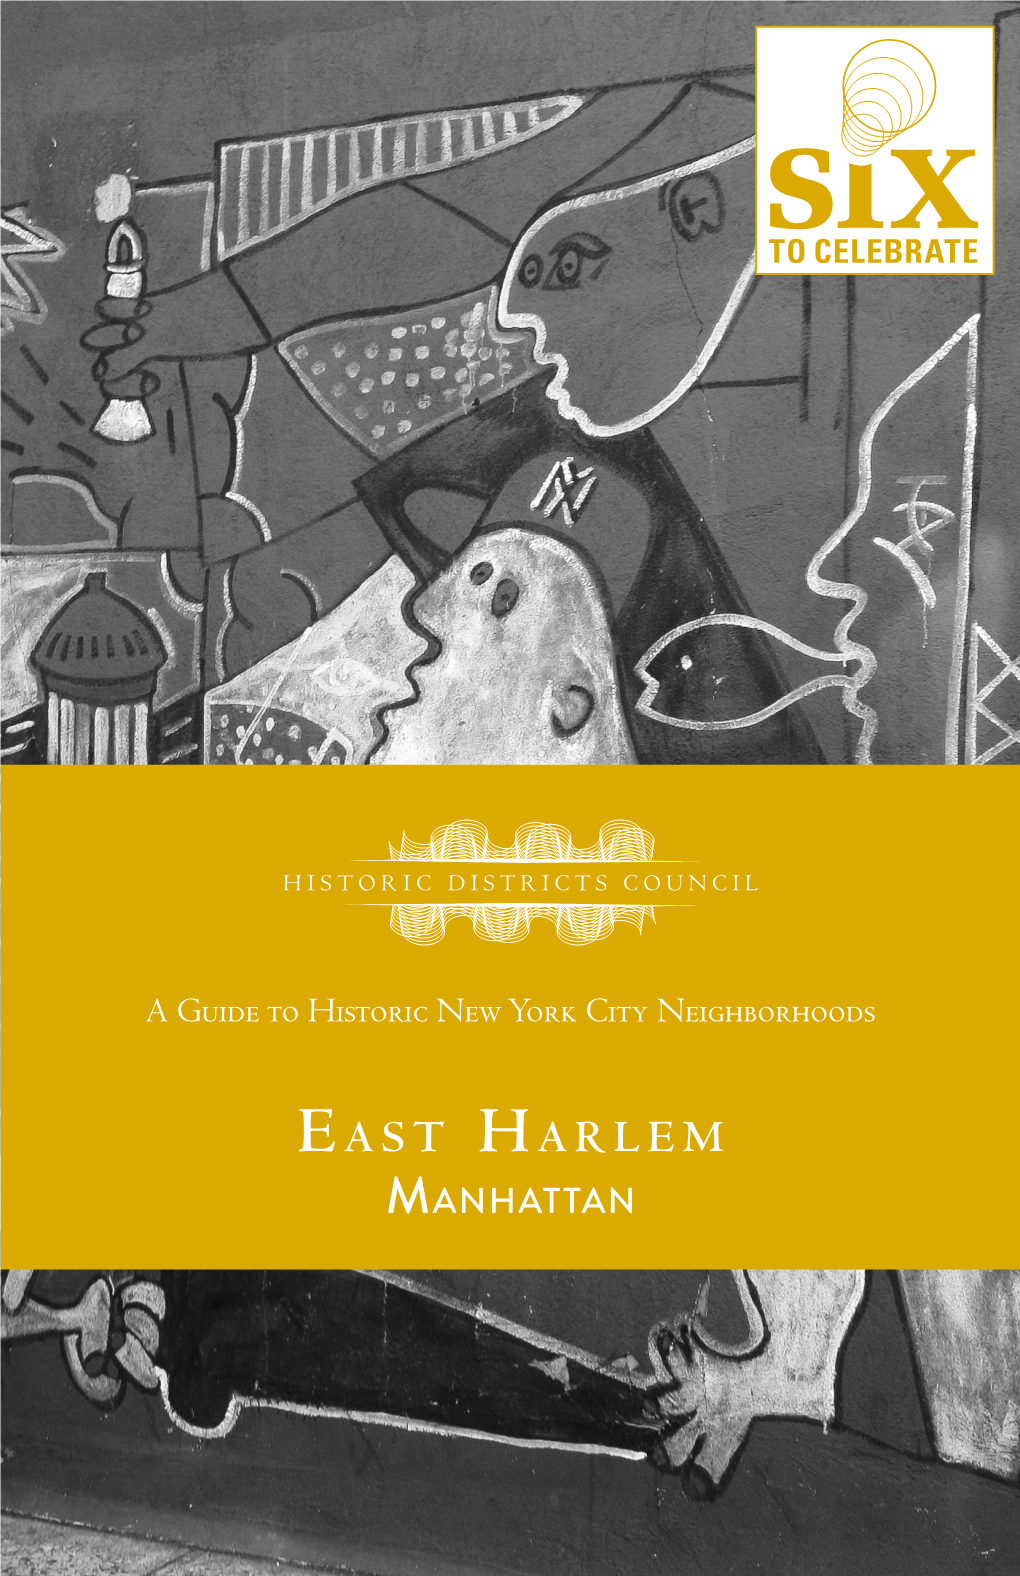 East Harlem East Harlem Encompasses a Large Section of Northeastern Manhattan Bounded by 96Th Street, 142Nd Street, Fifth Avenue and the Harlem River